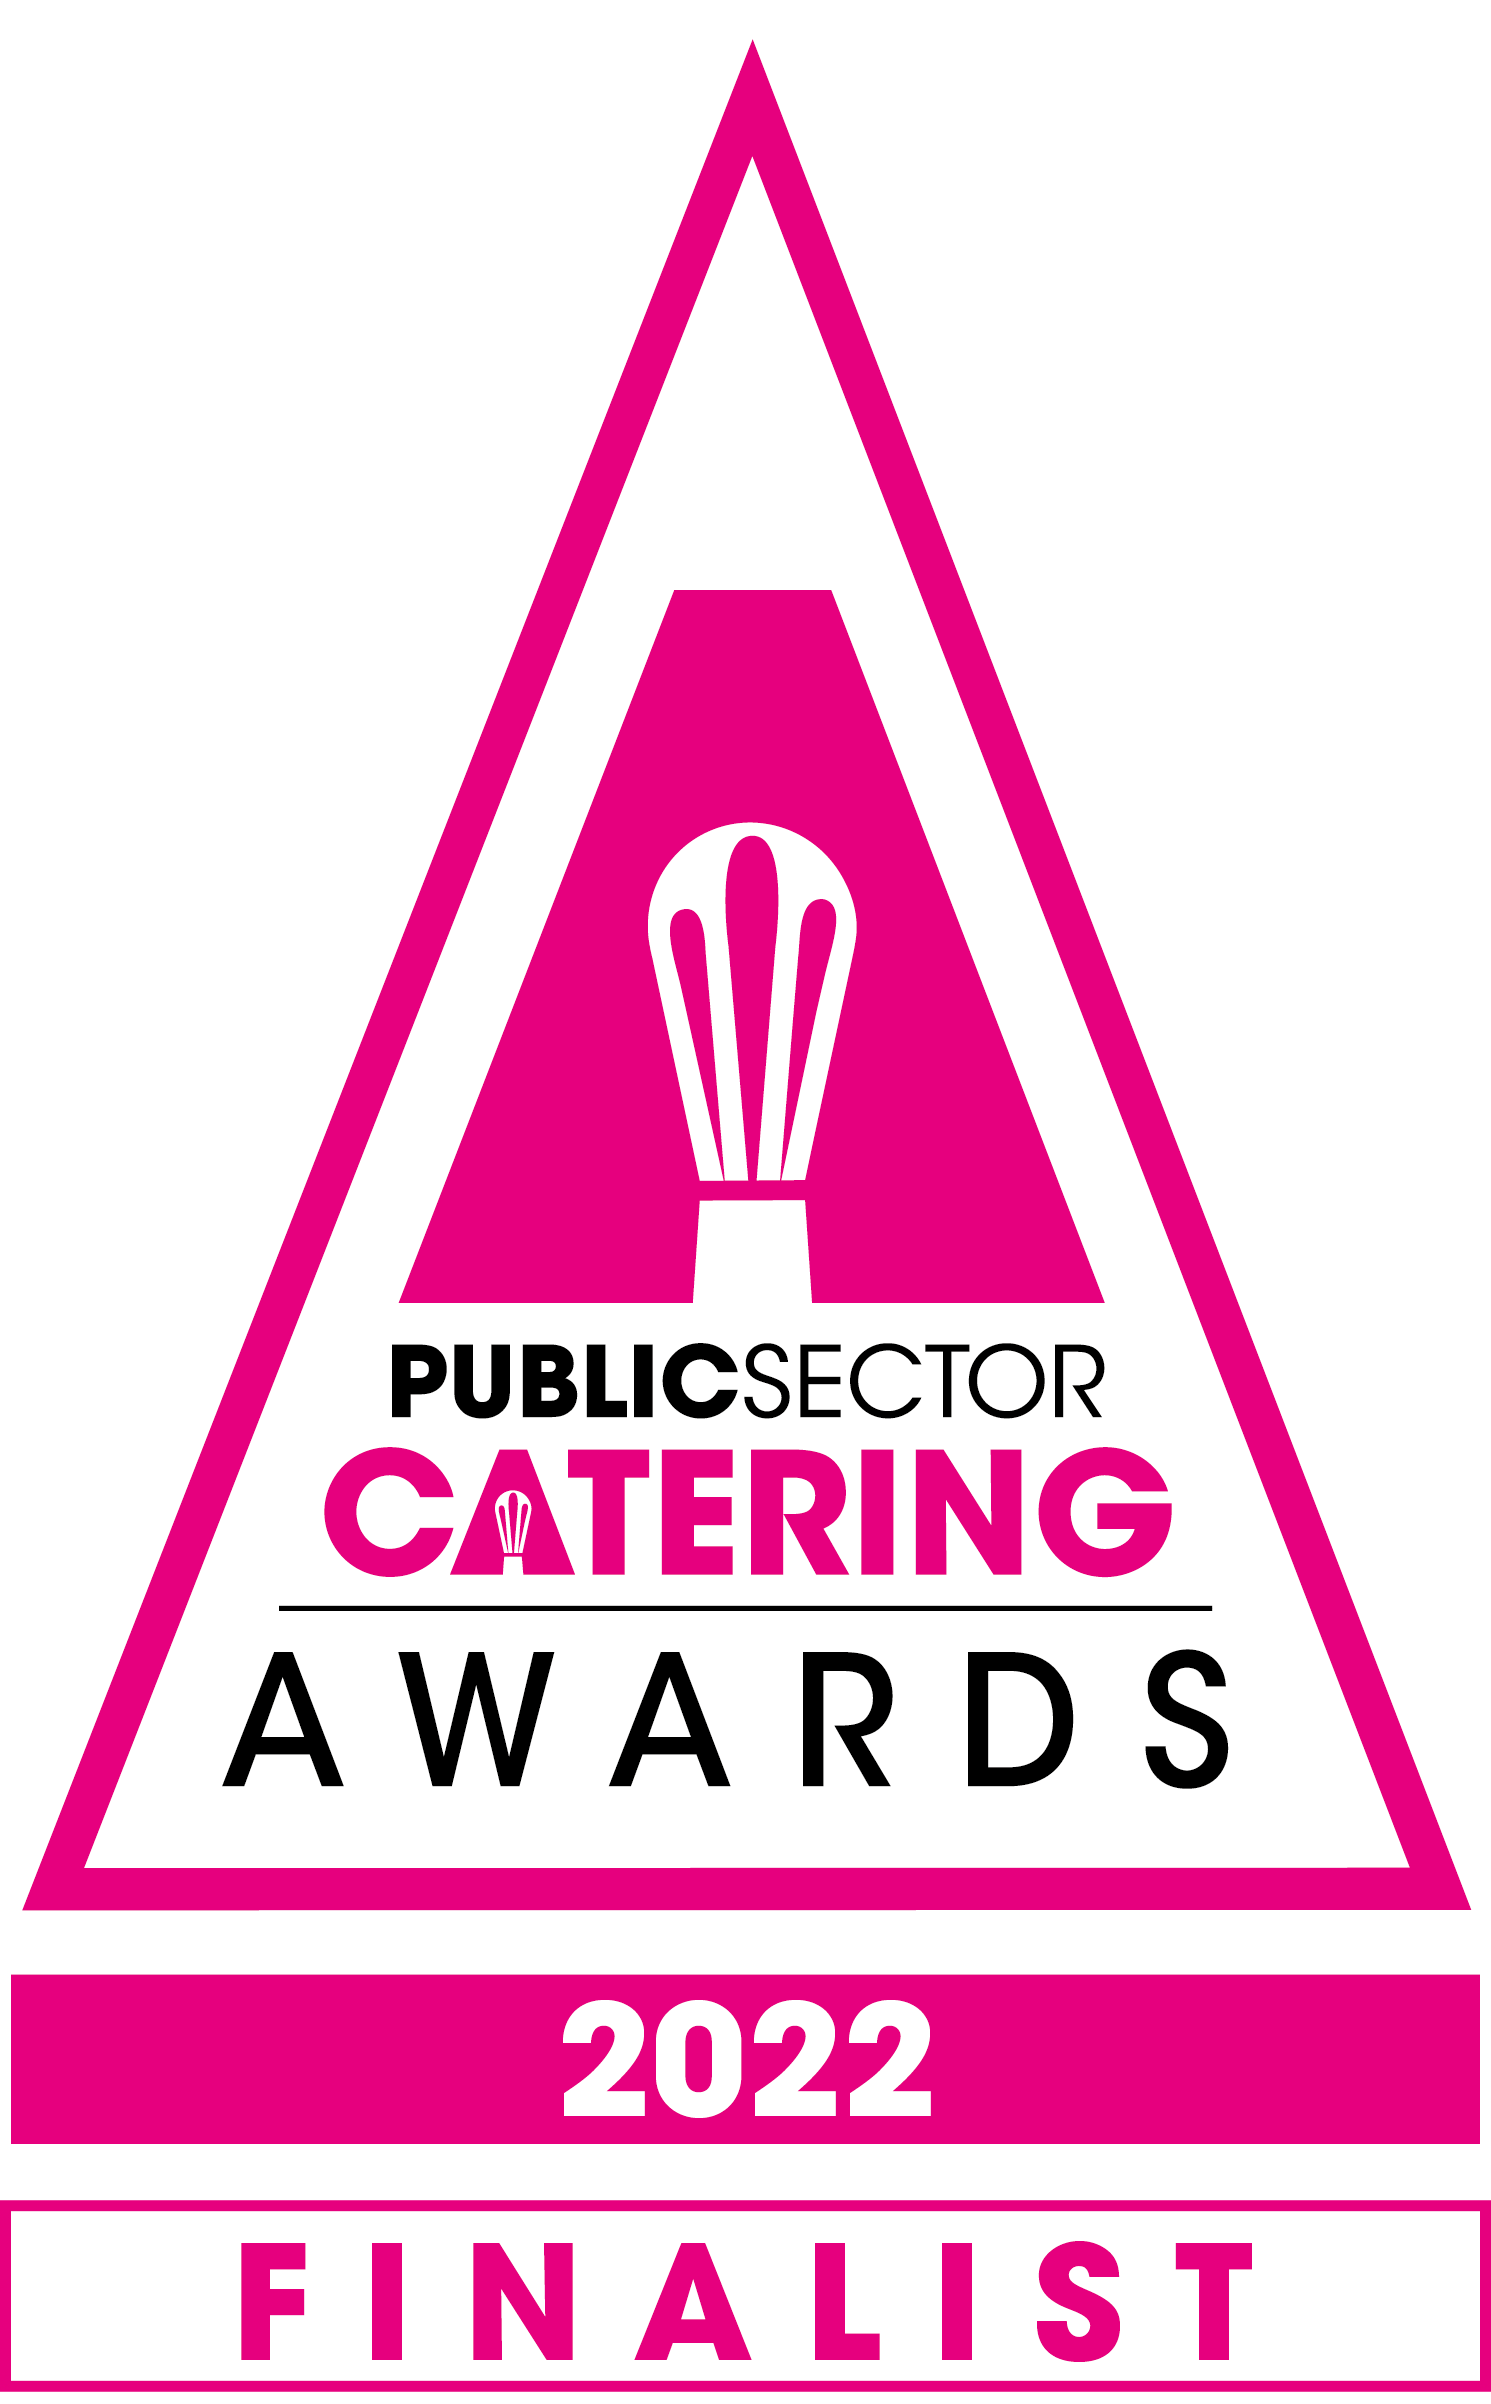 Public Sector Catering Awards Finalists 2022 - Care Catering AND Chef of the Year